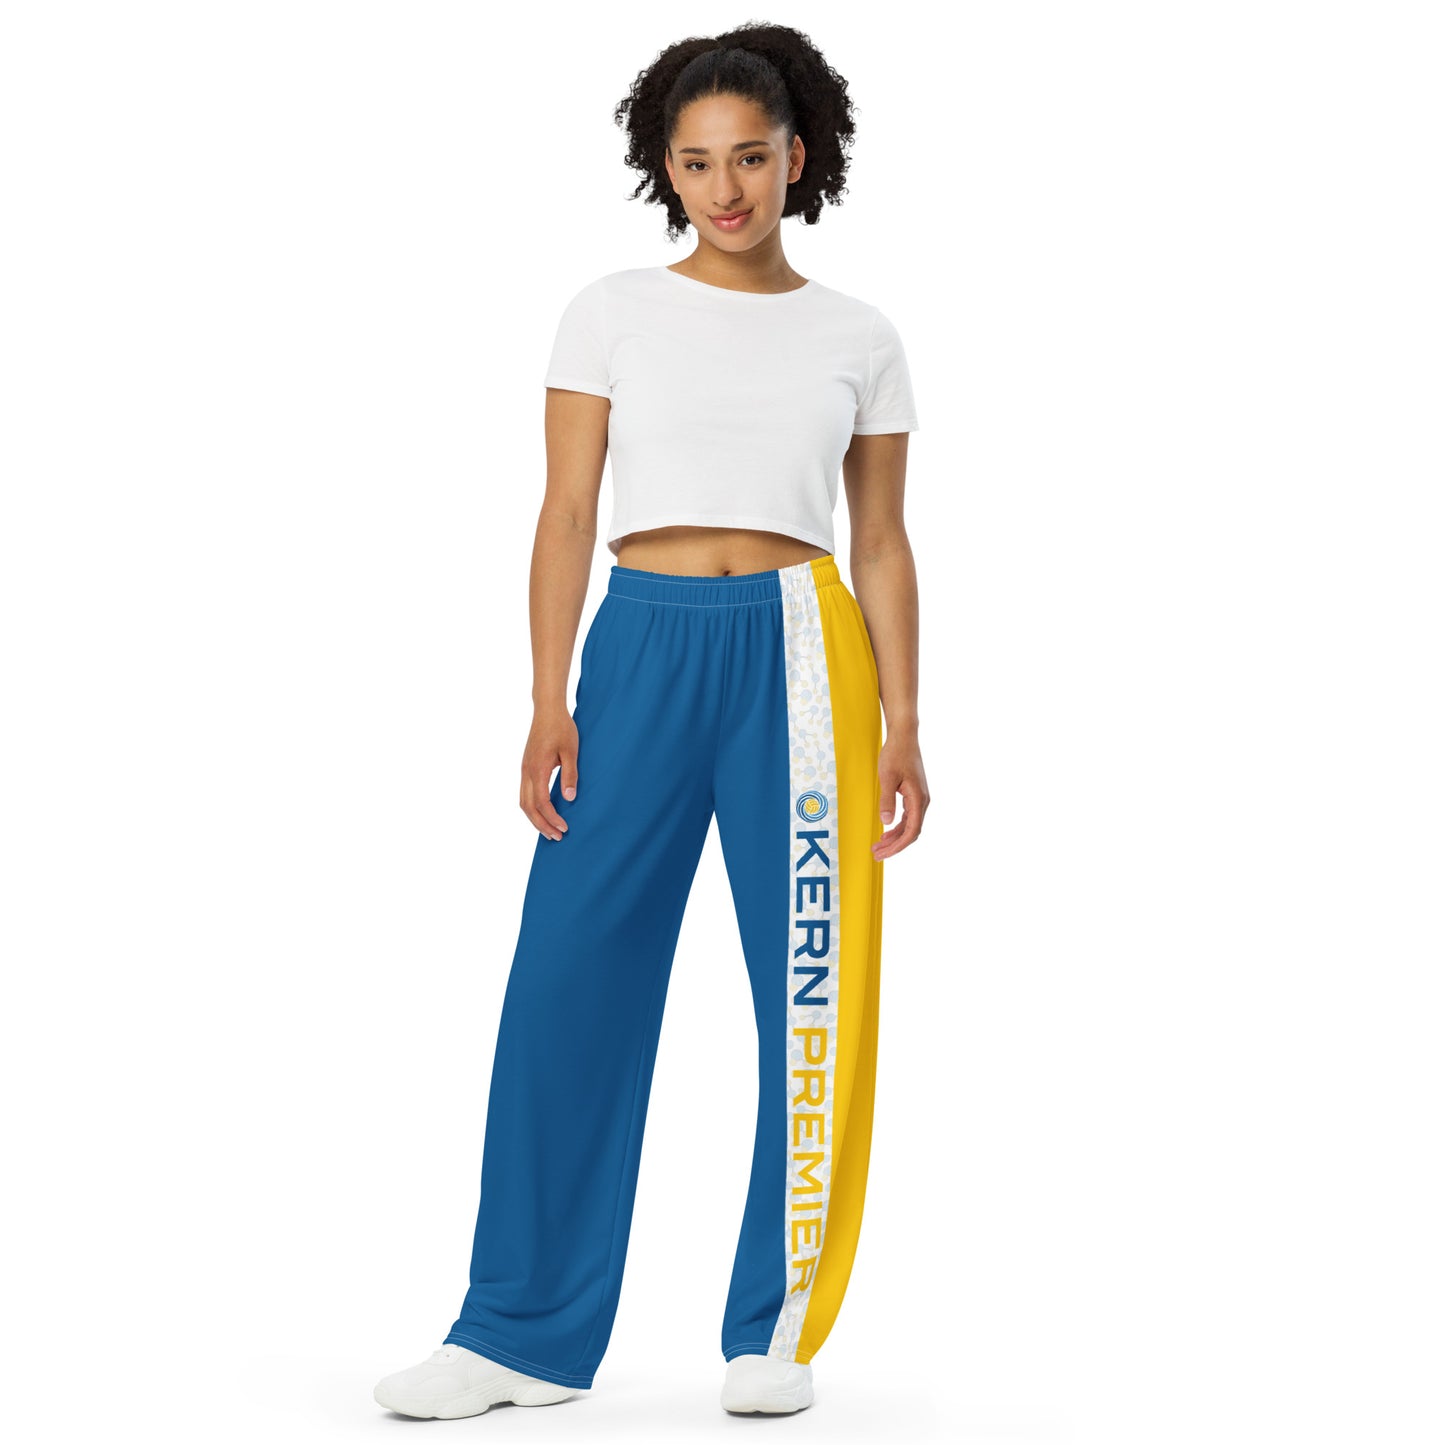 Kern Premier - All over print - Blue and Gold with H2O Molecule with Kern Premier Logo - unisex wide-leg pants